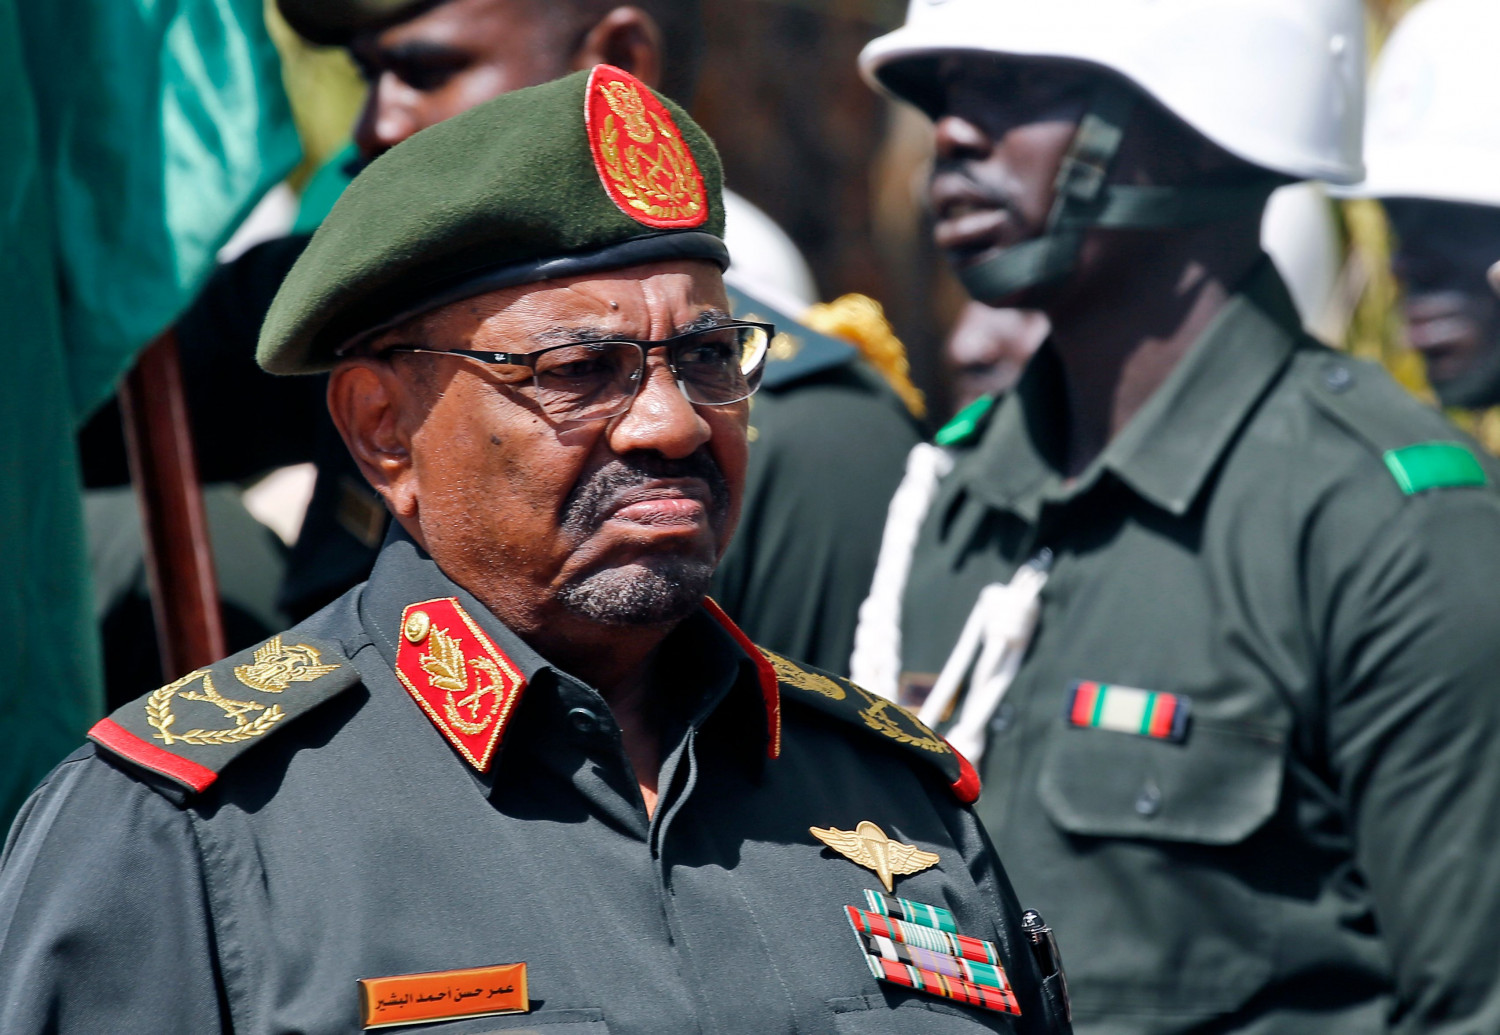 Sudan’s Bashir Overthrown in Military Coup After 30 Years in Power